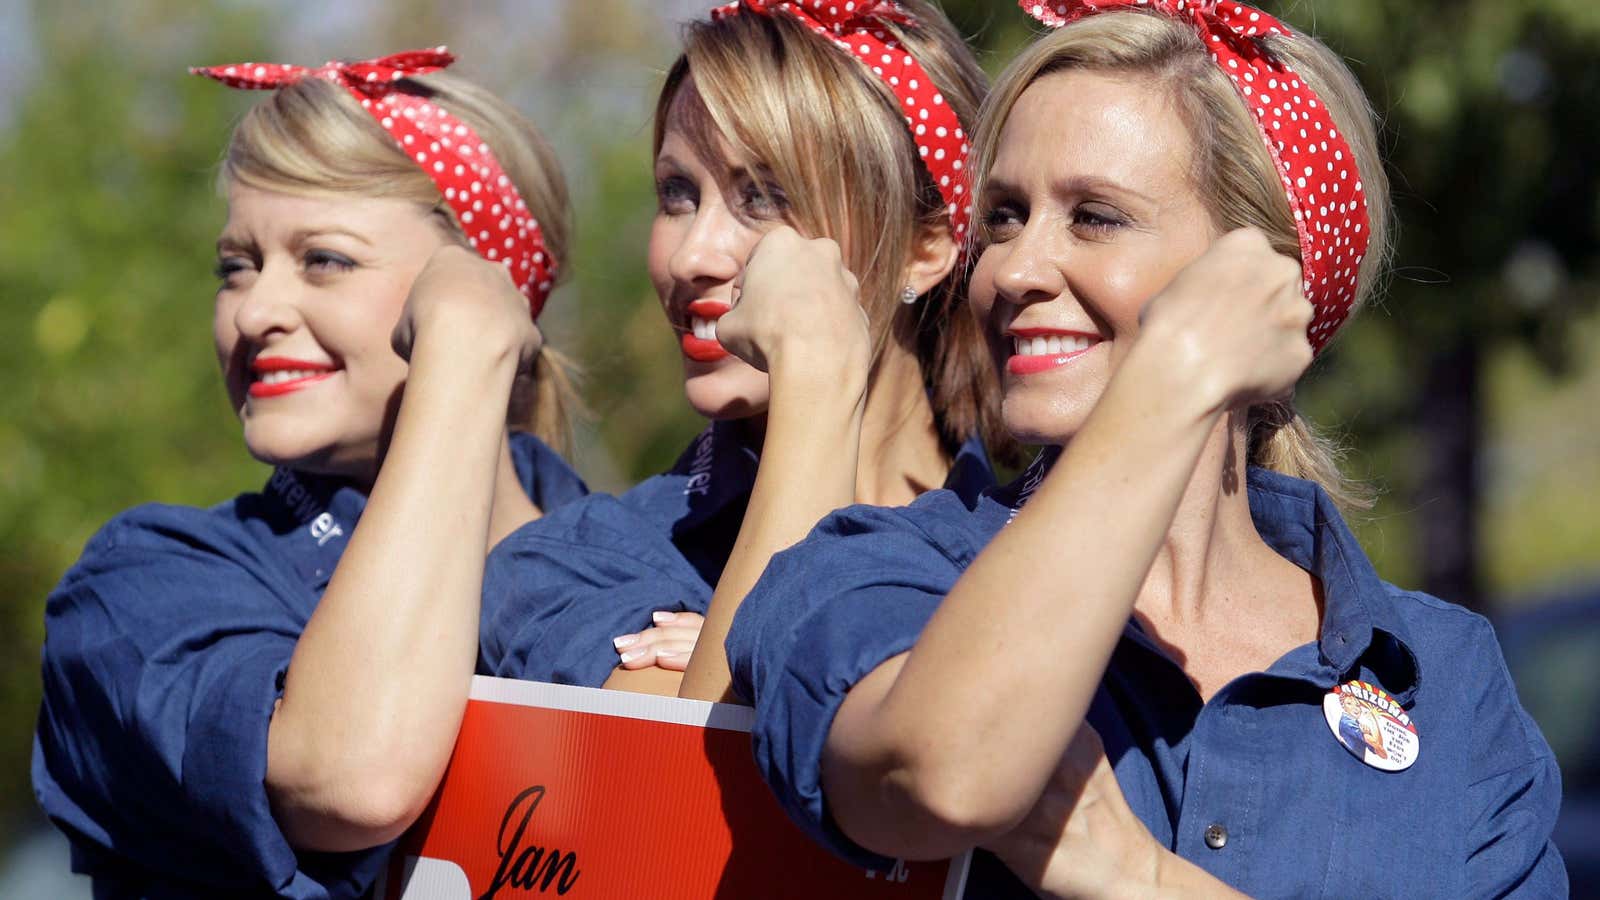 Will the Real Rosie the Riveter Please Stand Up?